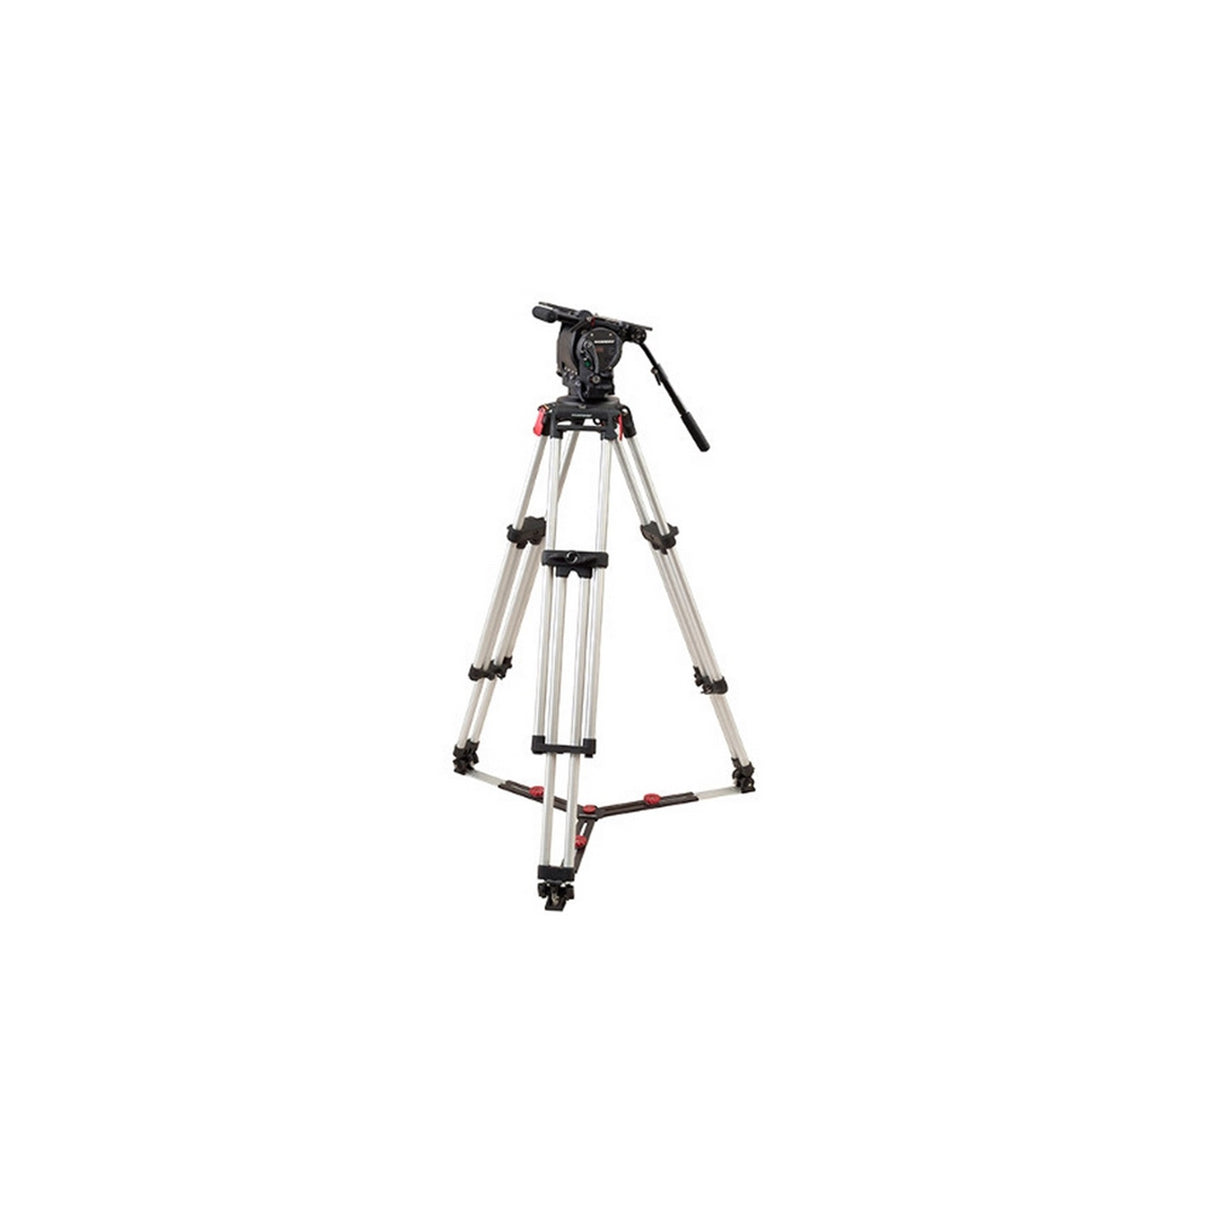 OConnor 2575D Head and Cine Mitchell Tripod with Floor Spreader